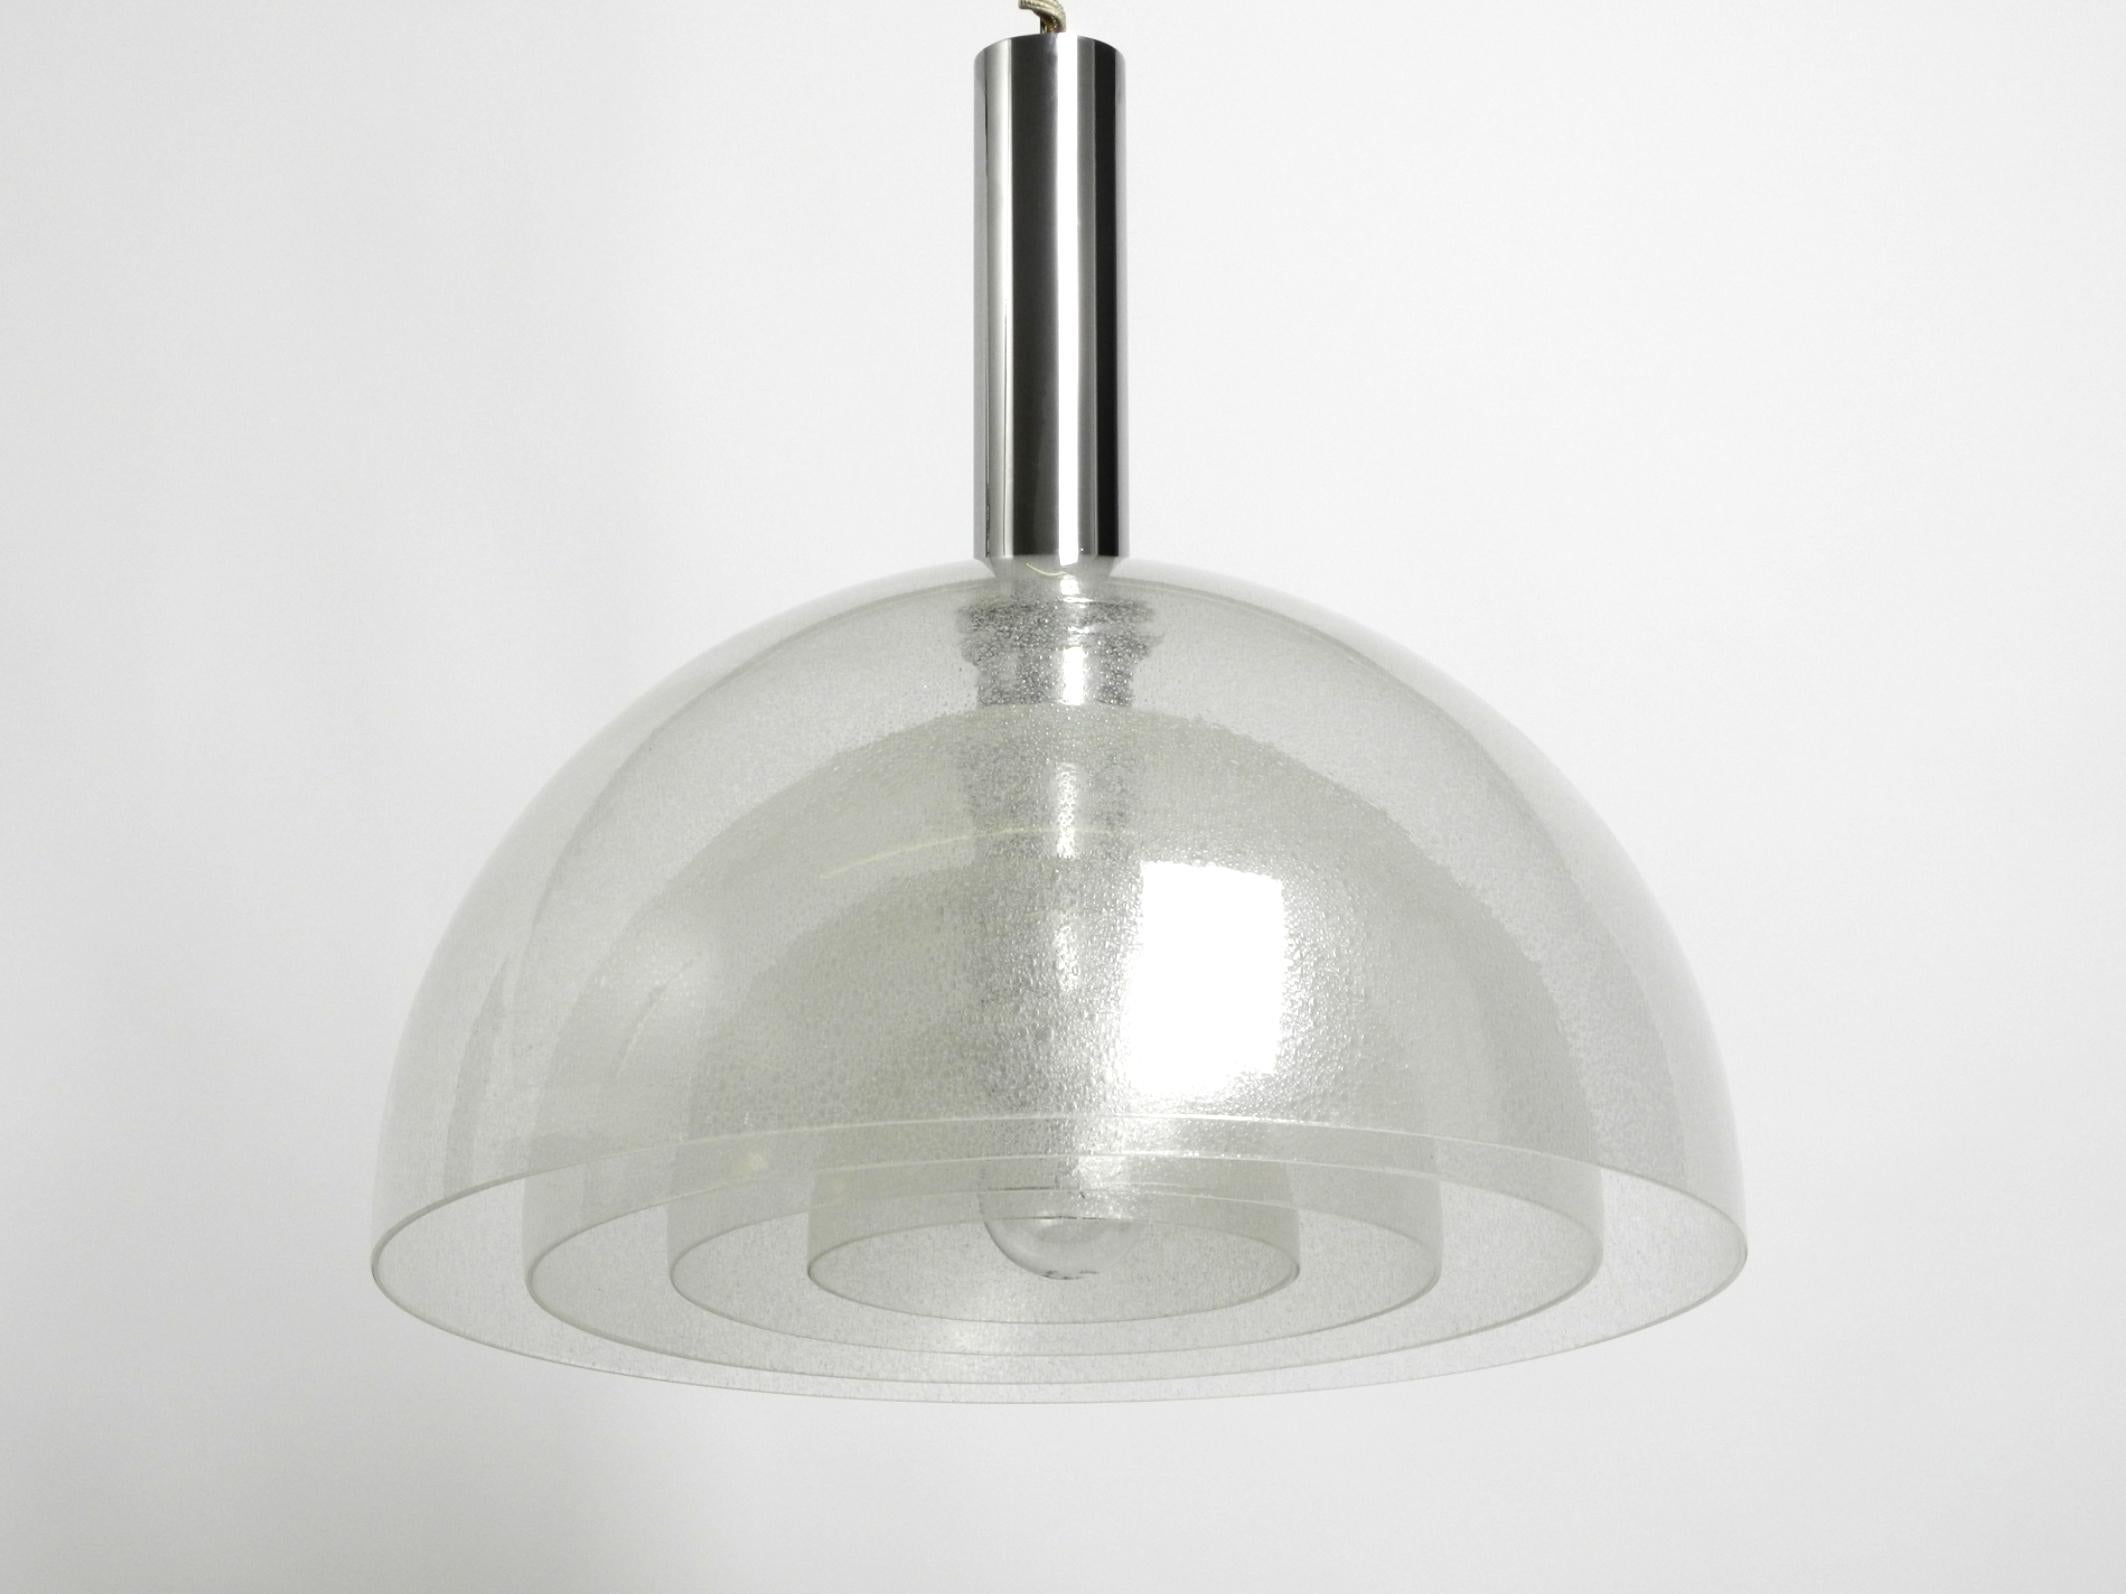 Beautiful Italian pendant lamp from the 70s by Carlo Nason model LT338 for Mazzega.
Made from Pulegoso Murano glass. Made in Italy.
In very good condition. All parts still original. Probably hardly used.
Hardly any signs of use. Still original